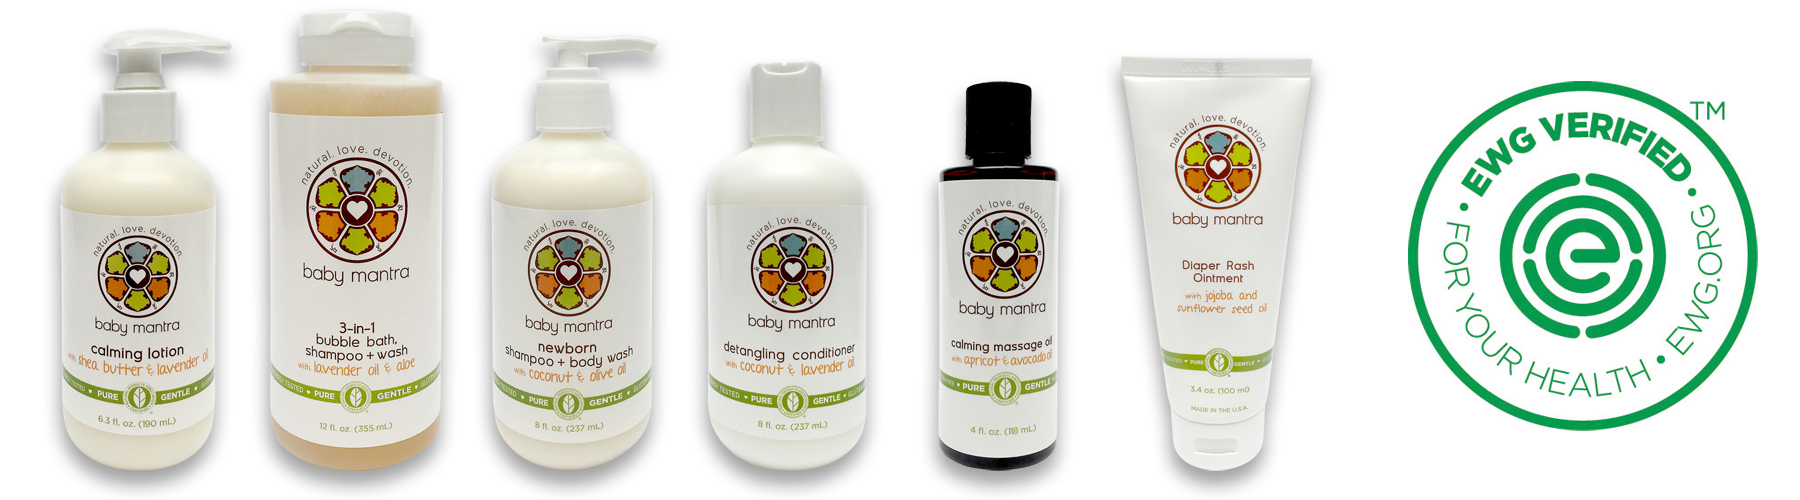 EWG Verified Skin Care Products from Baby Mantra